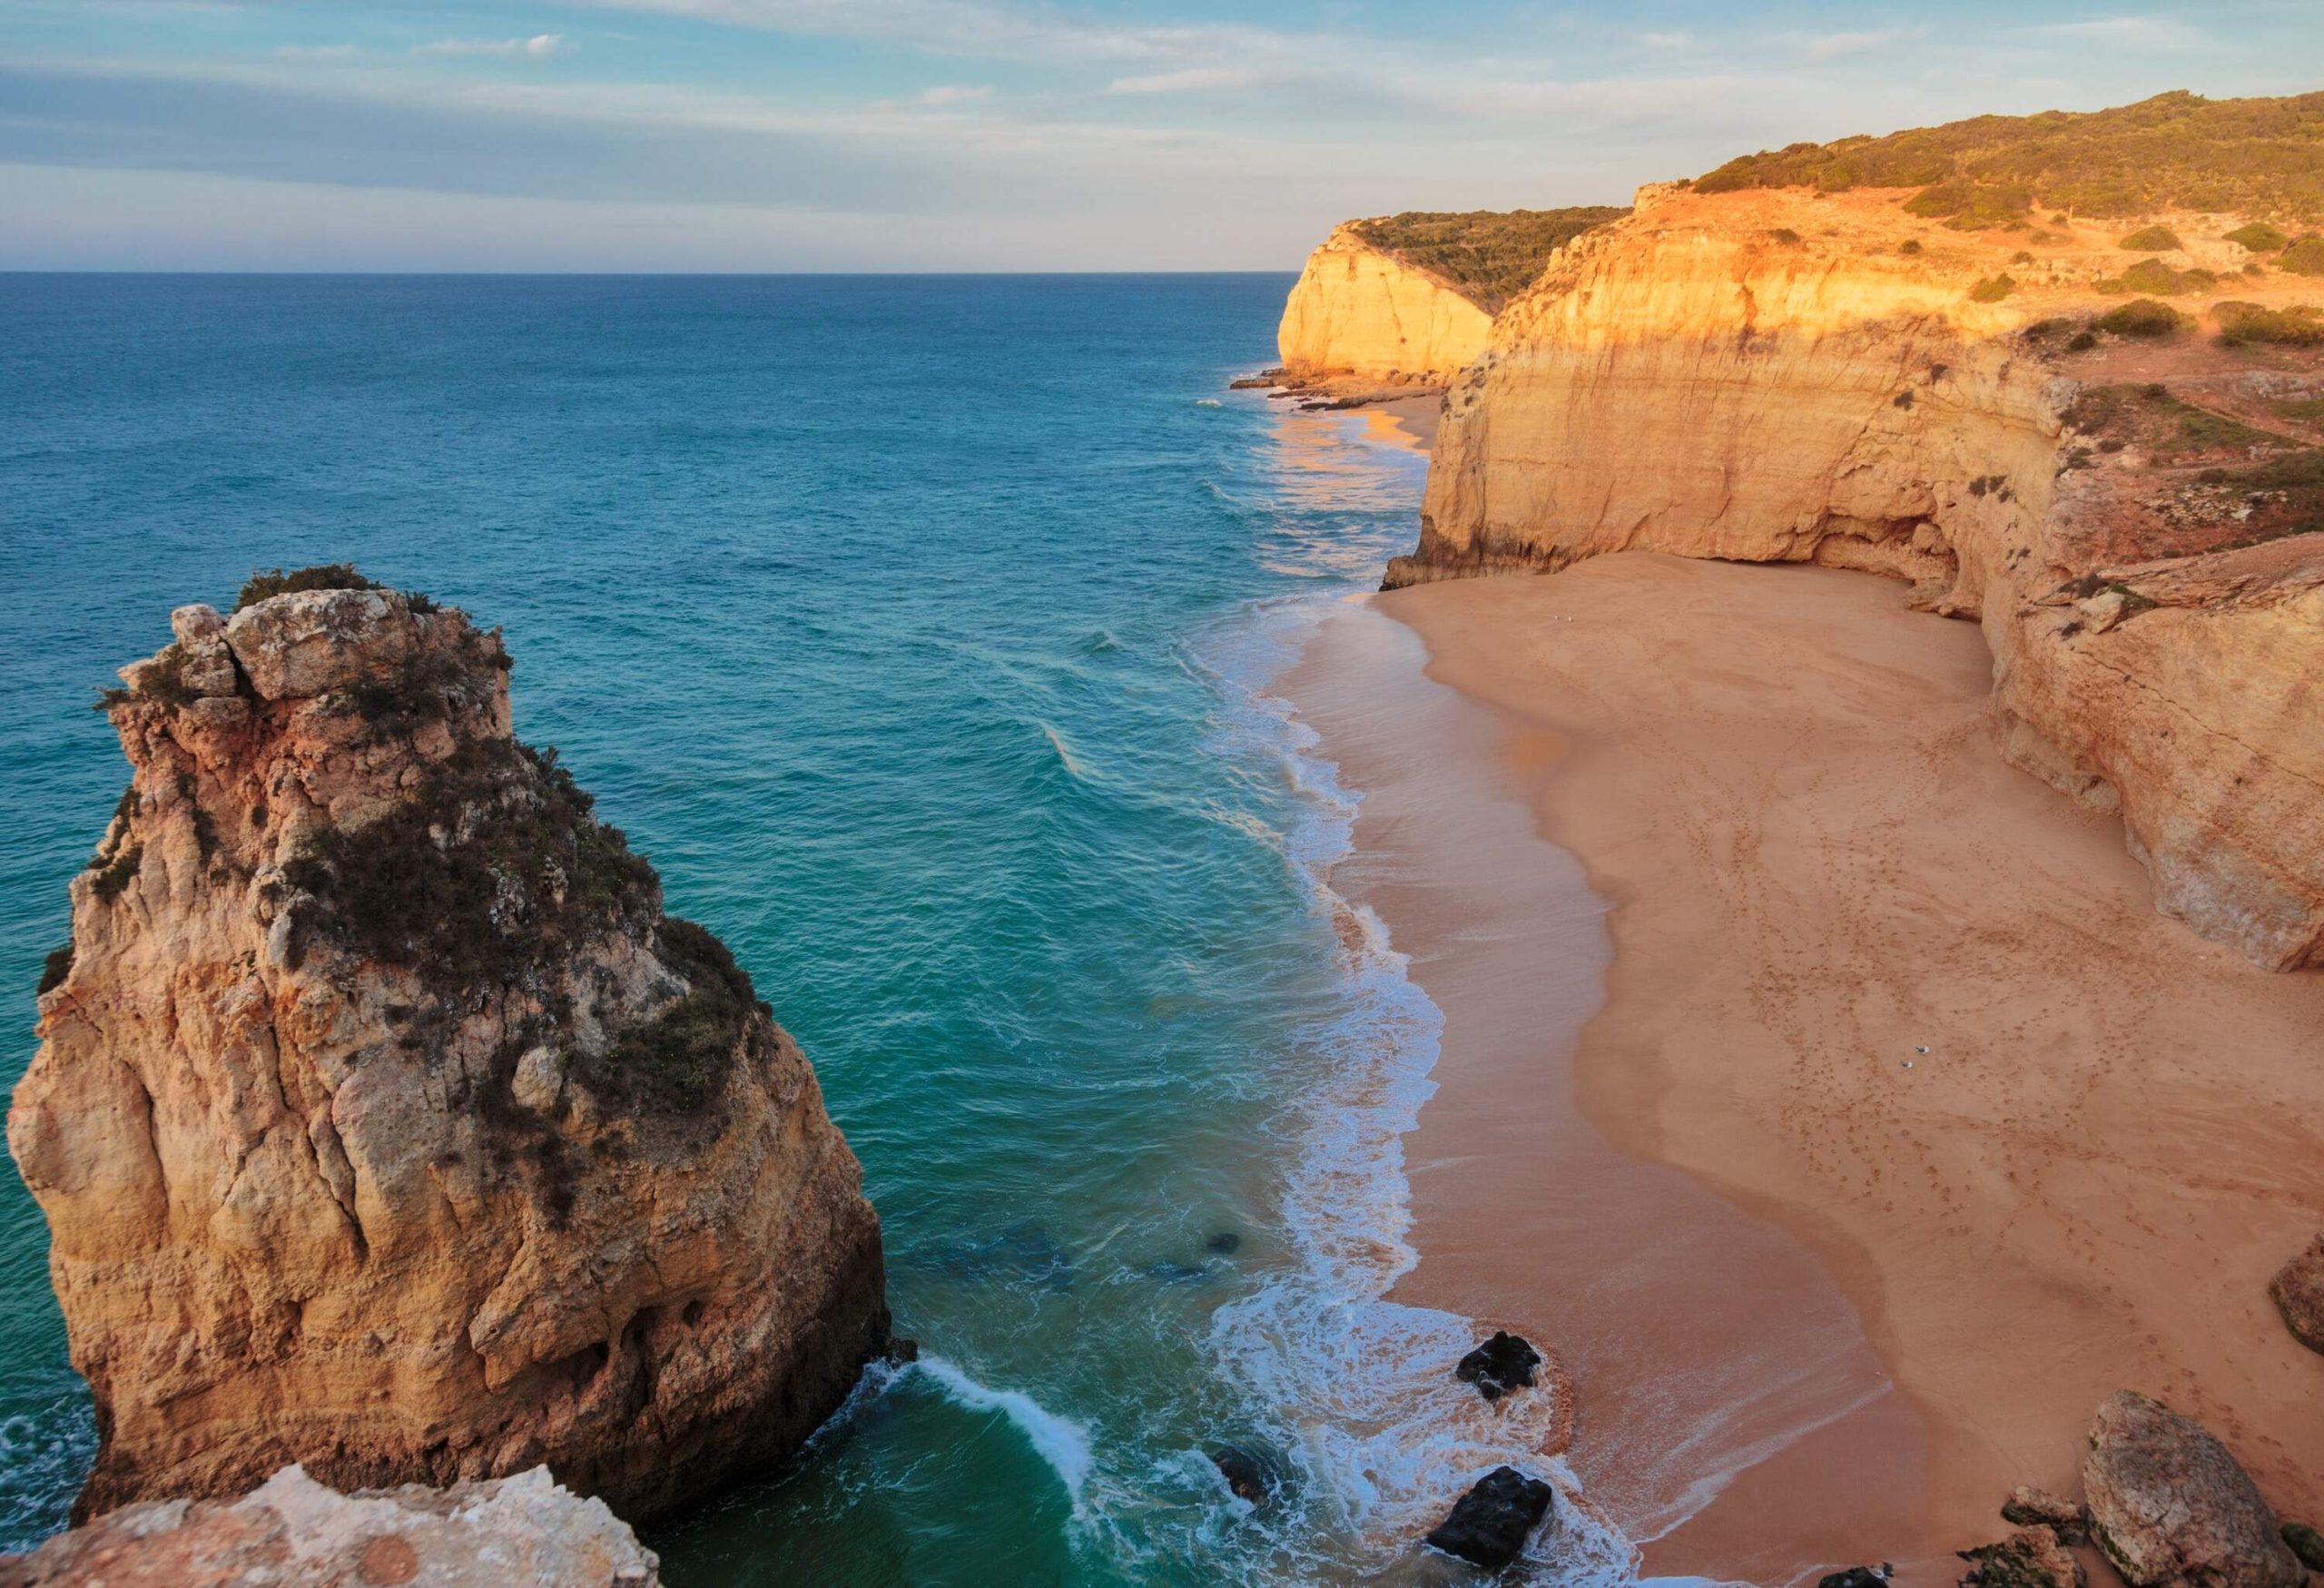 An empty beach with towering cliffs lining its coast.